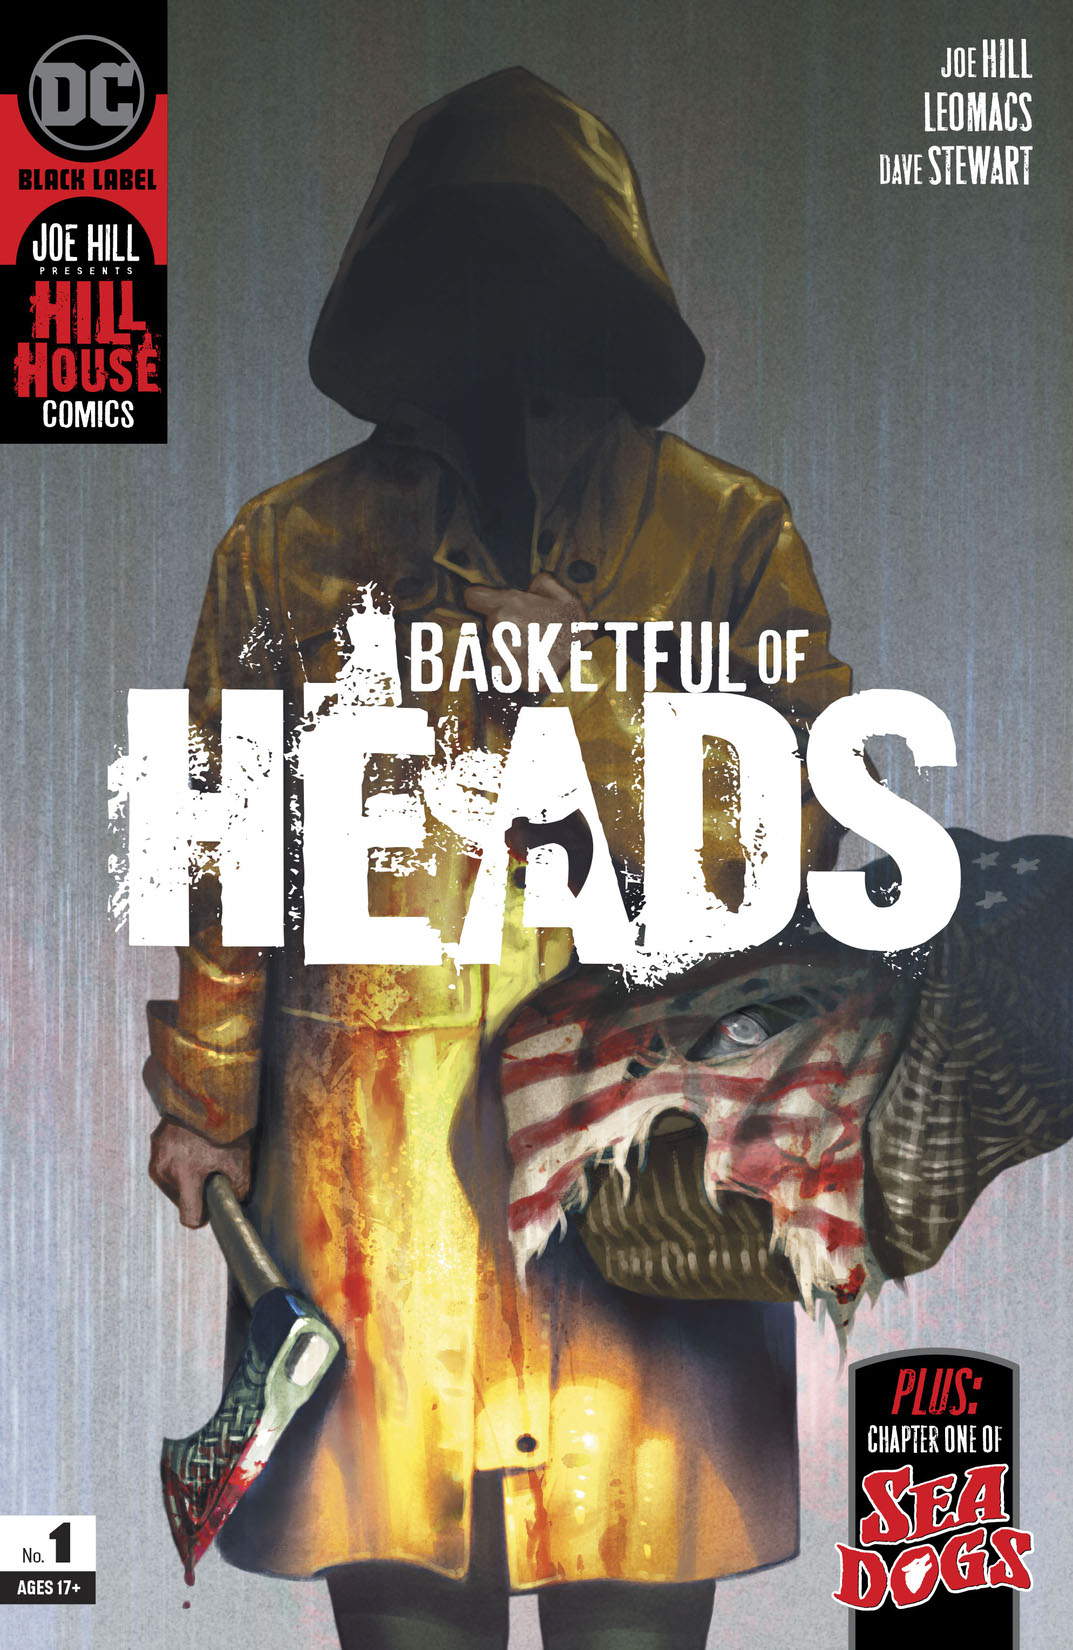 Basketful of Heads #1 preview images